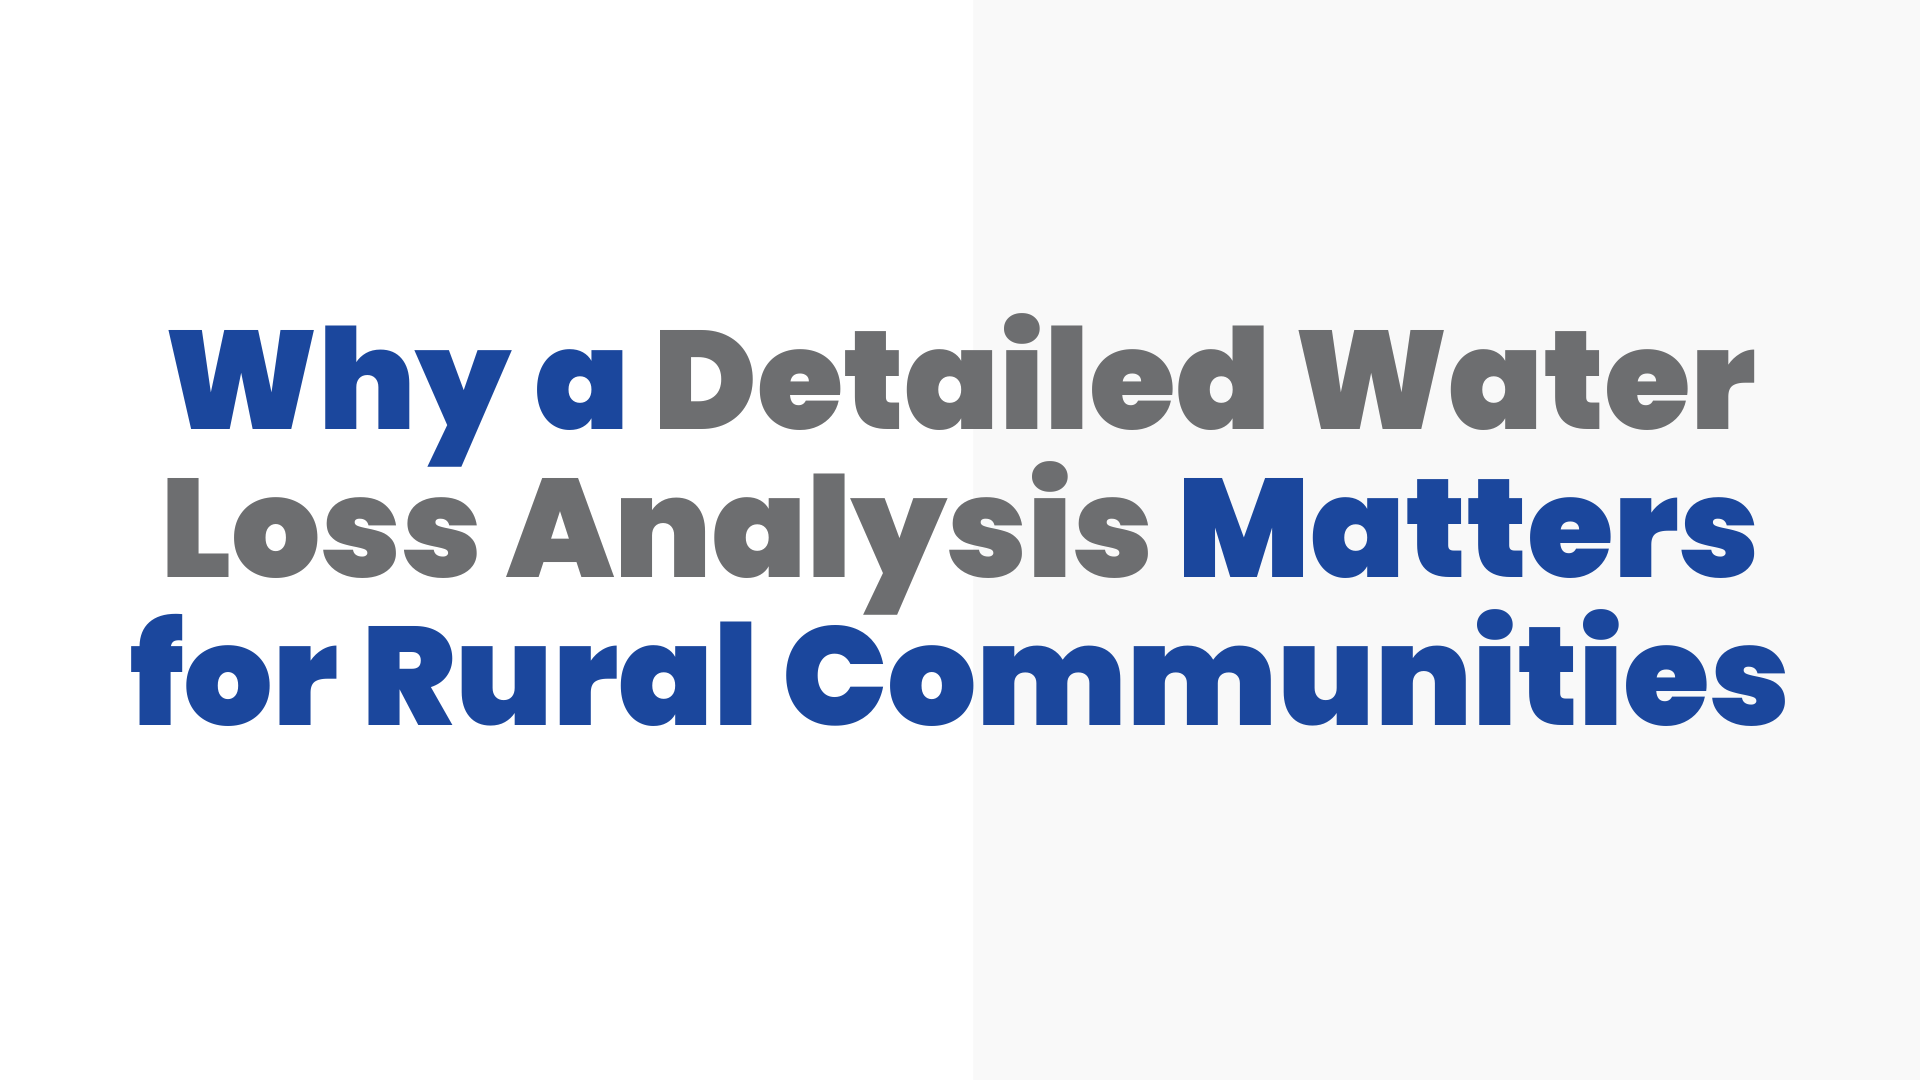 Why a Detailed Water Loss Analysis Matters for Rural Communities